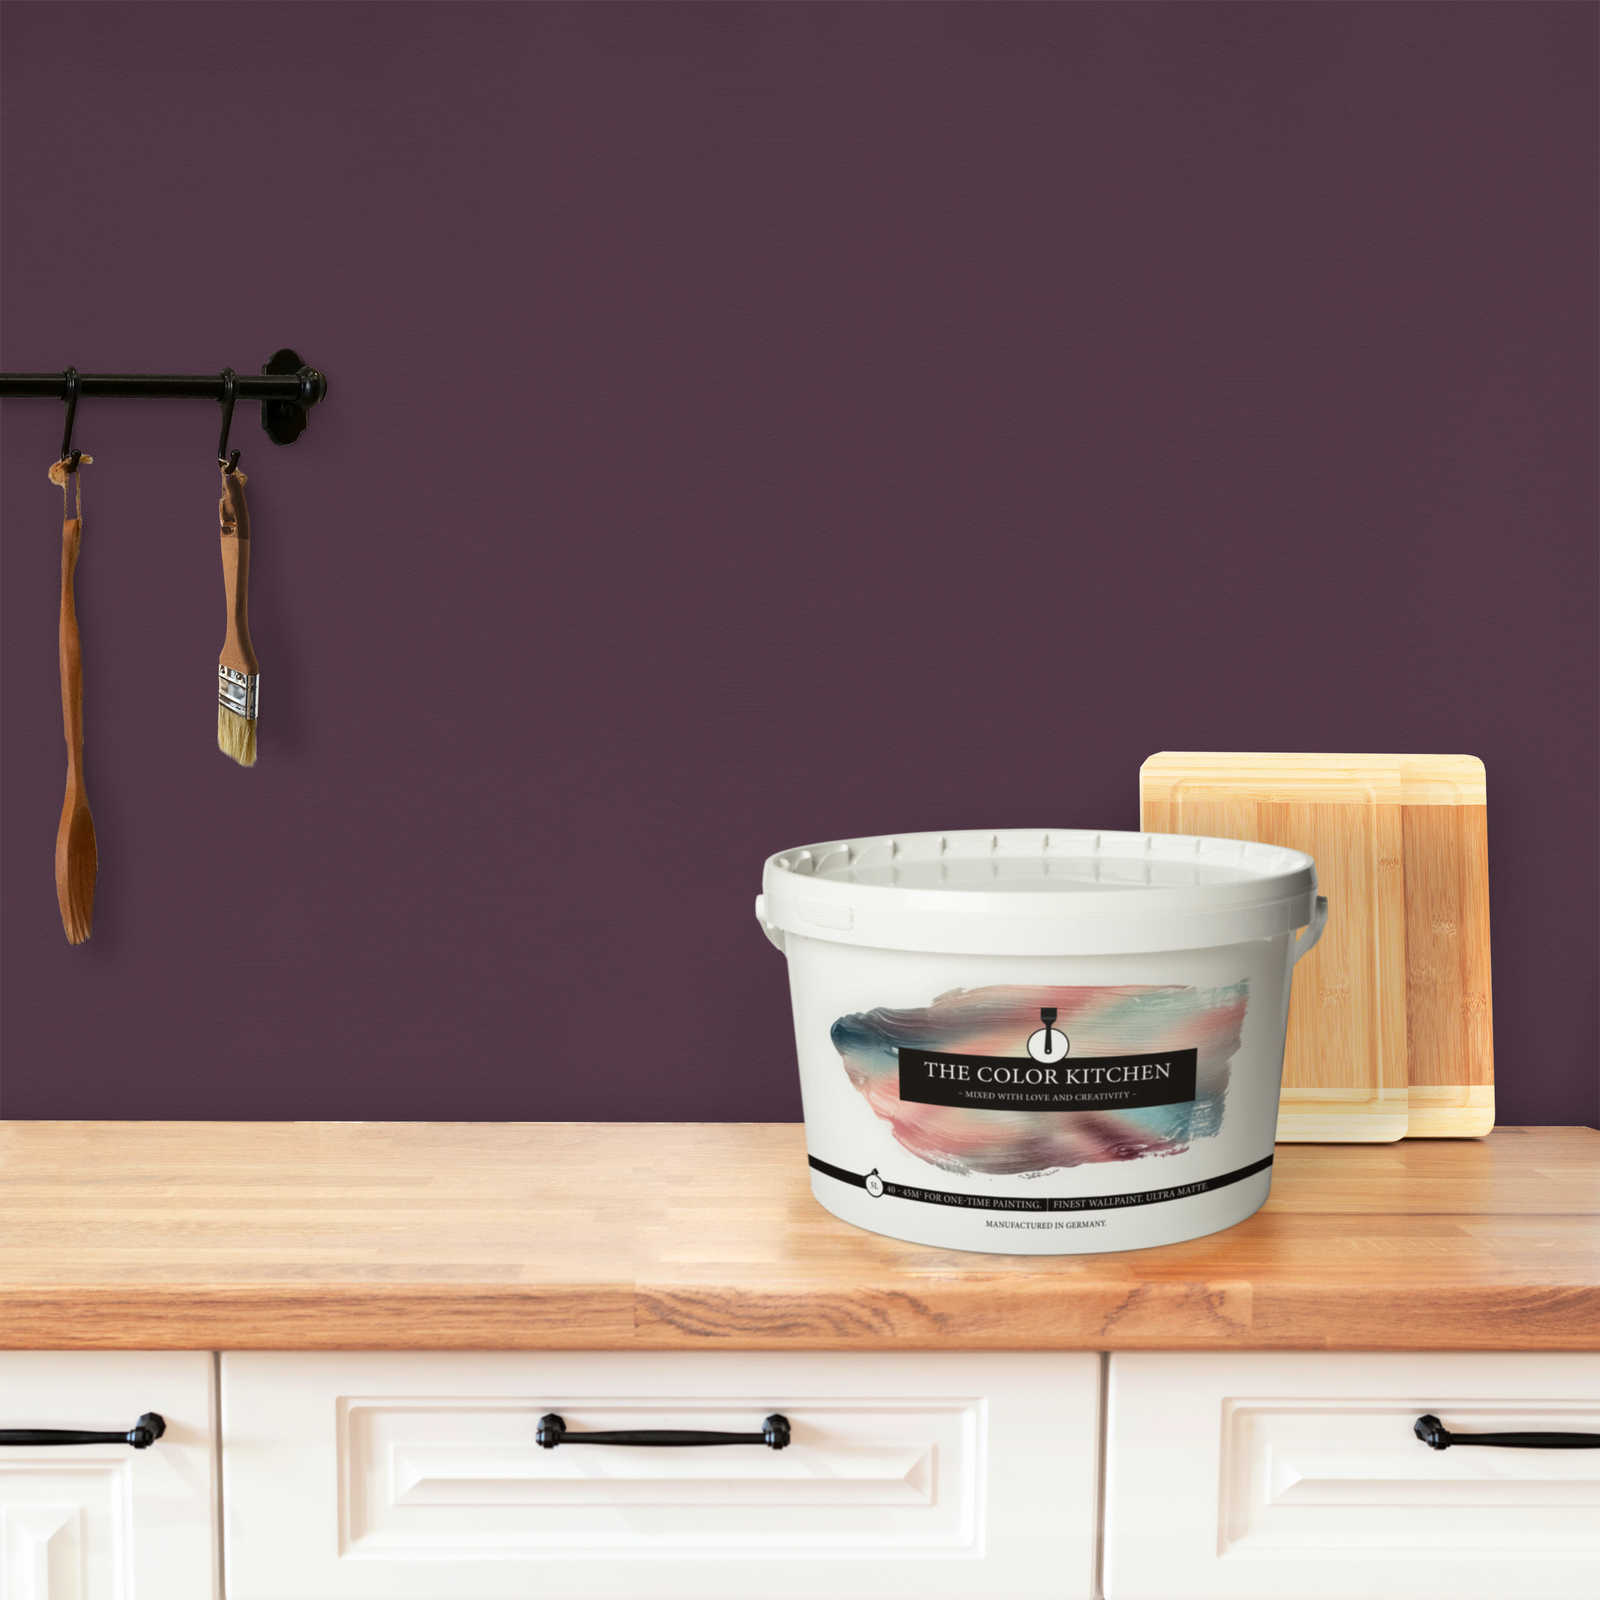             Wall Paint TCK2007 »Beady Beetroot« in an interplay of violet and red – 5.0 litre
        